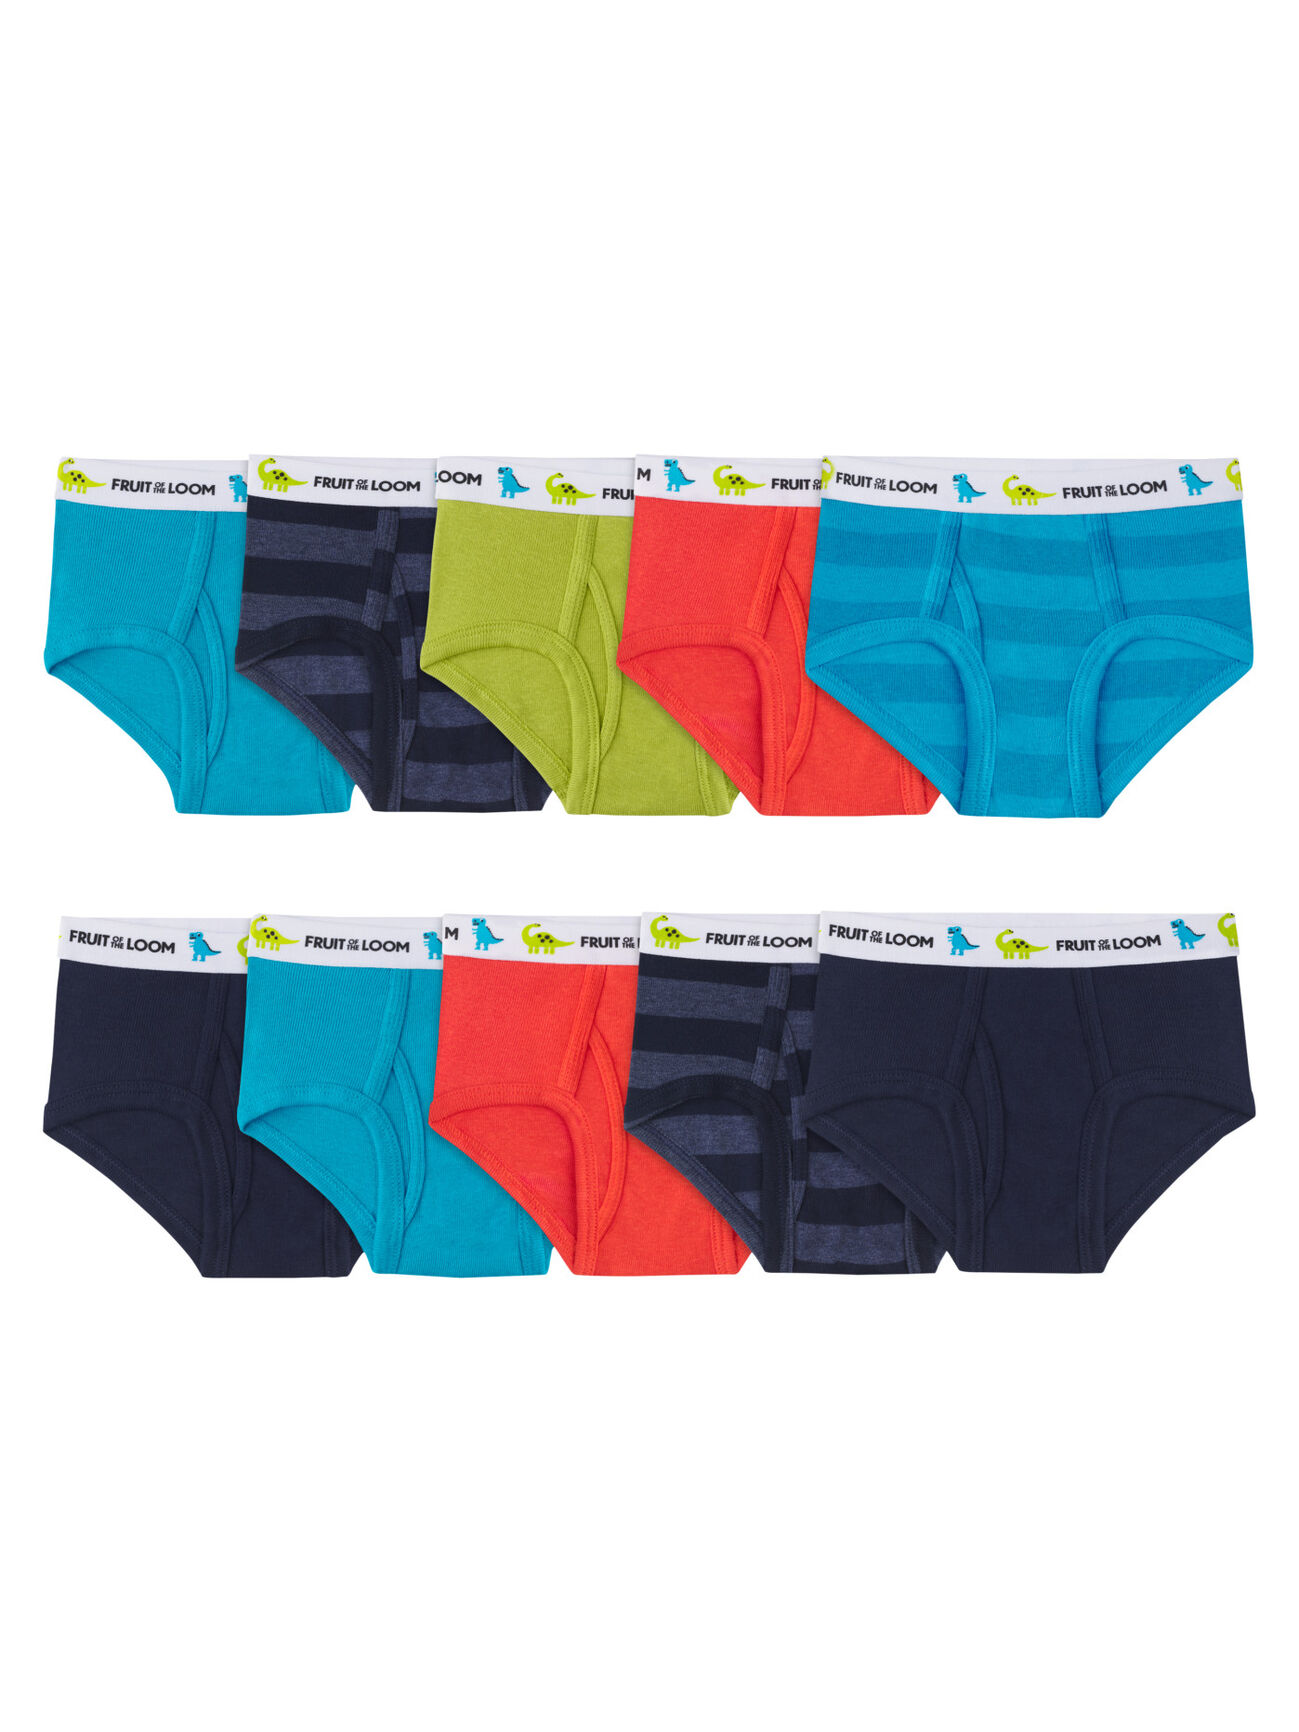 Fruit of the Loom Boys' Seamless Comfort Boxer Briefs, 4 Pack